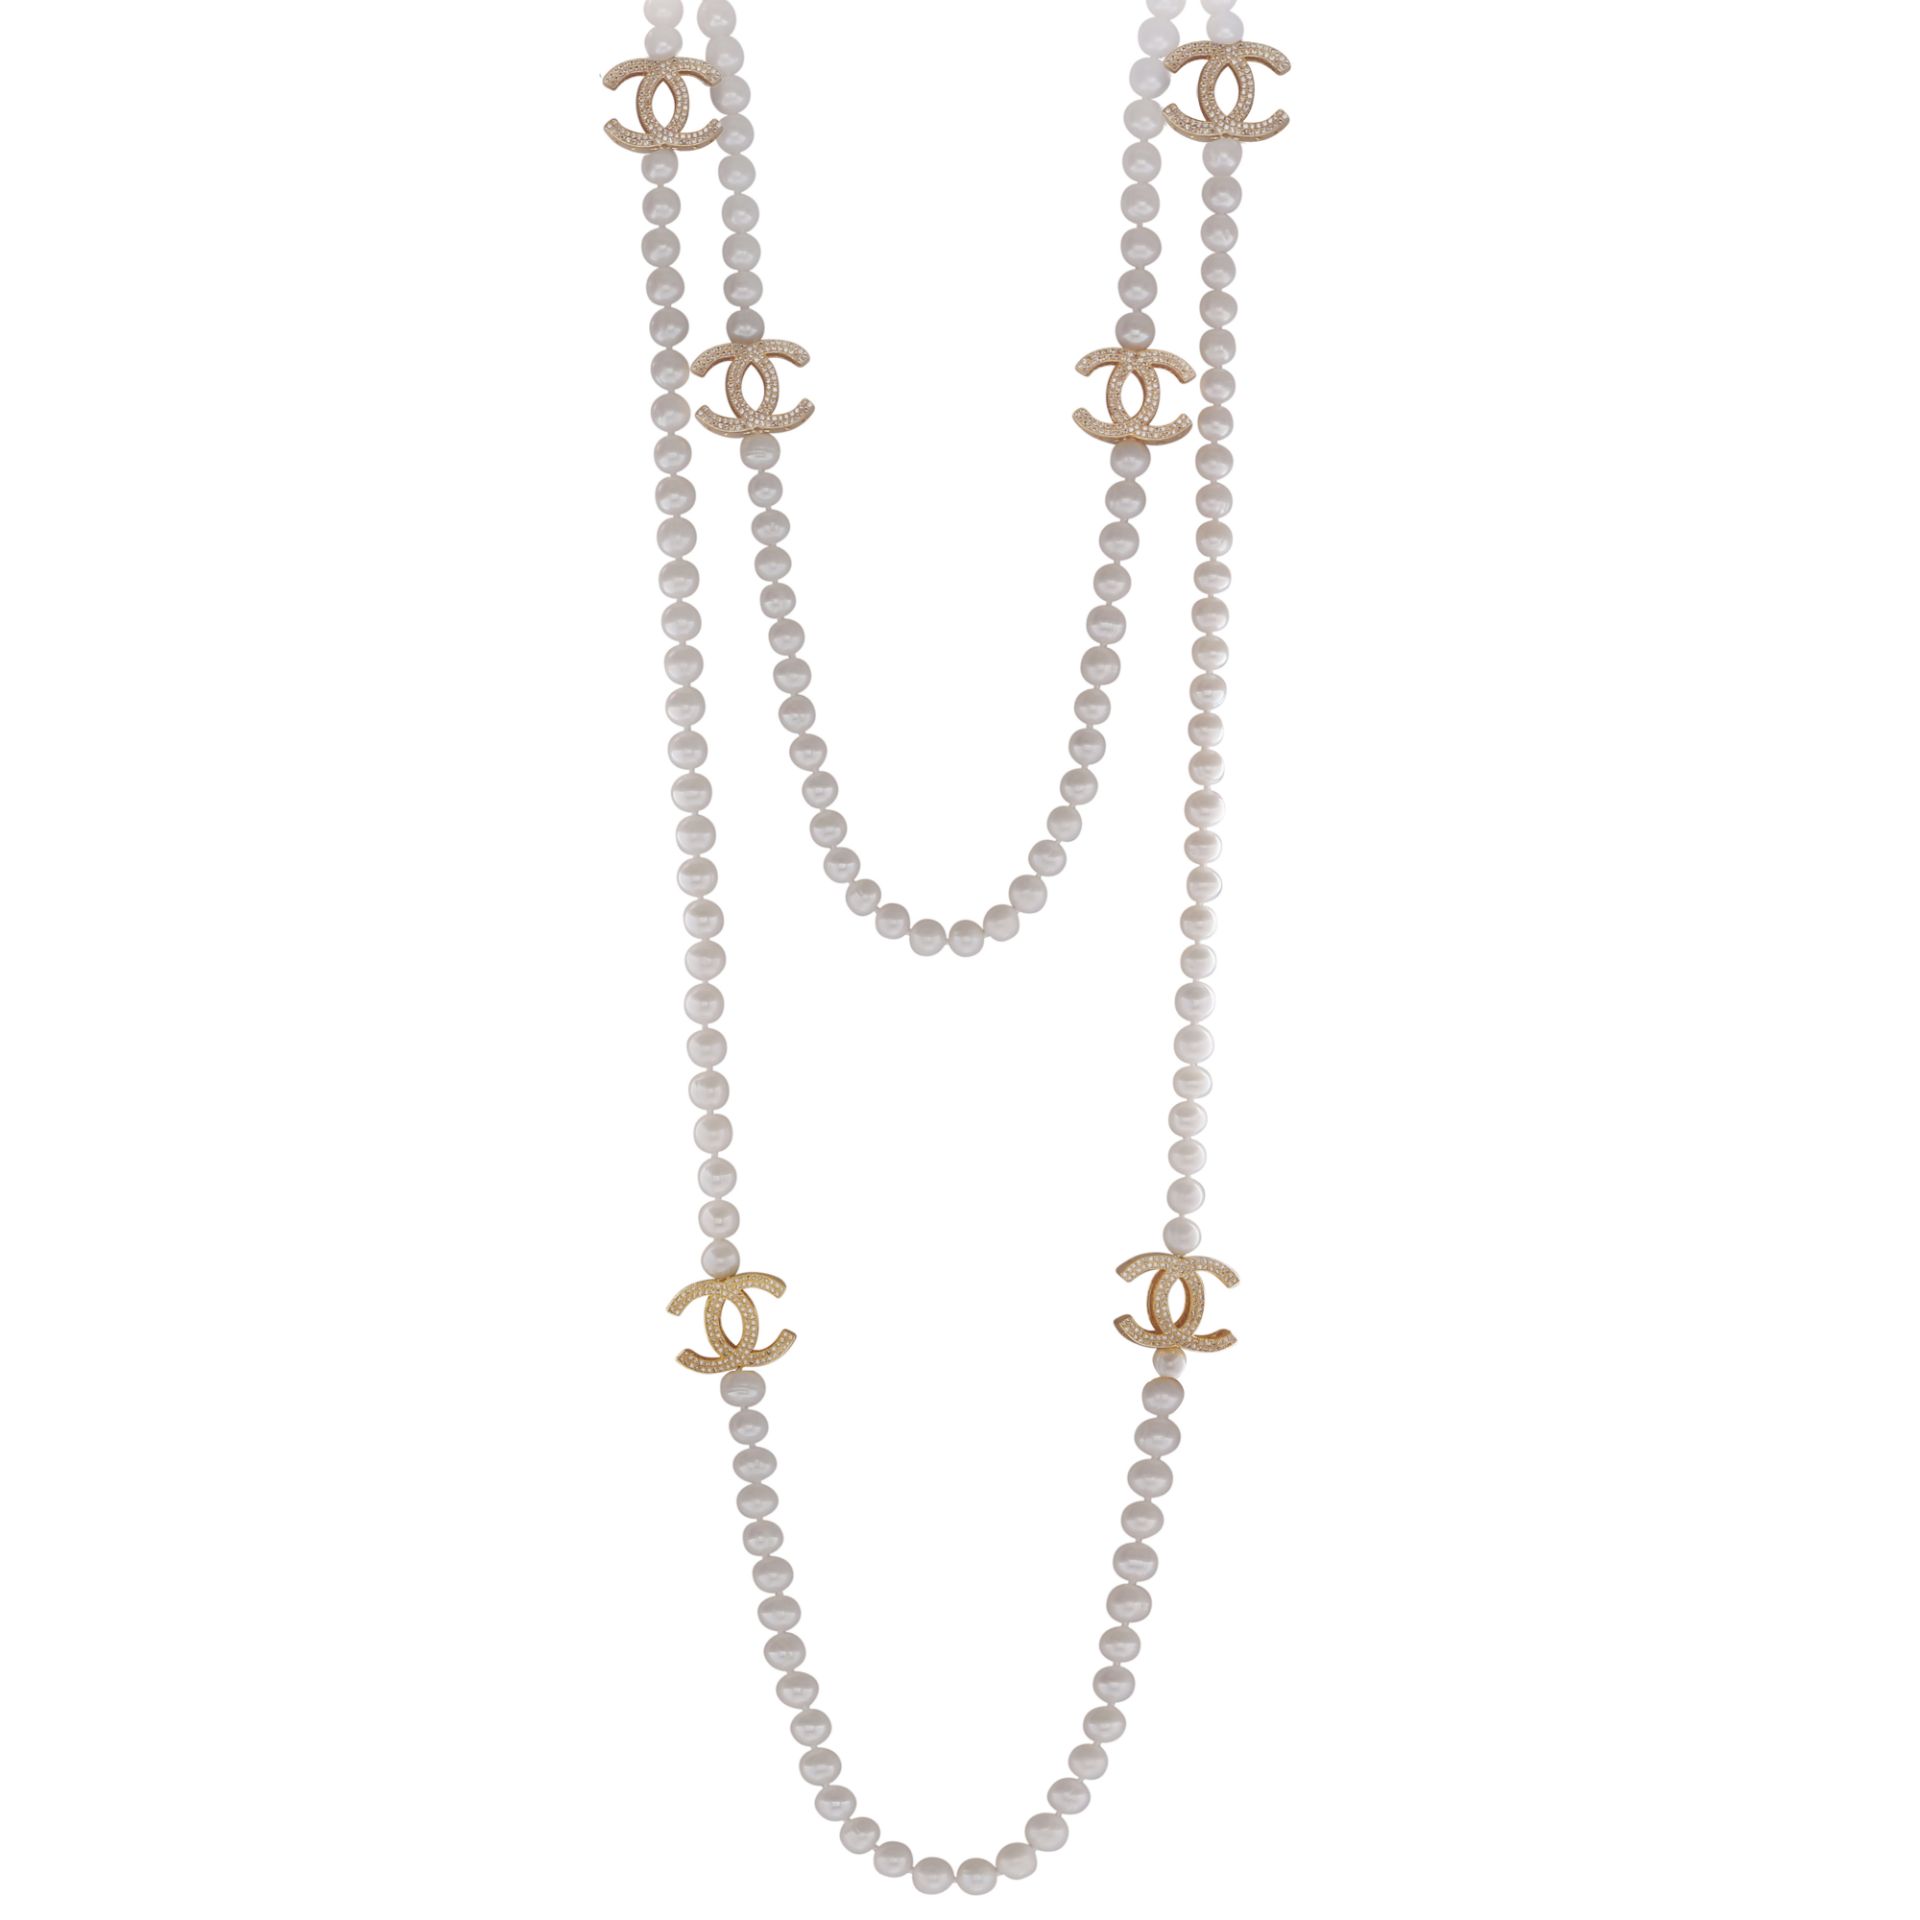 A cultured pearl necklace with jewelled Chanel logo spacers. Length 160cm / 63".